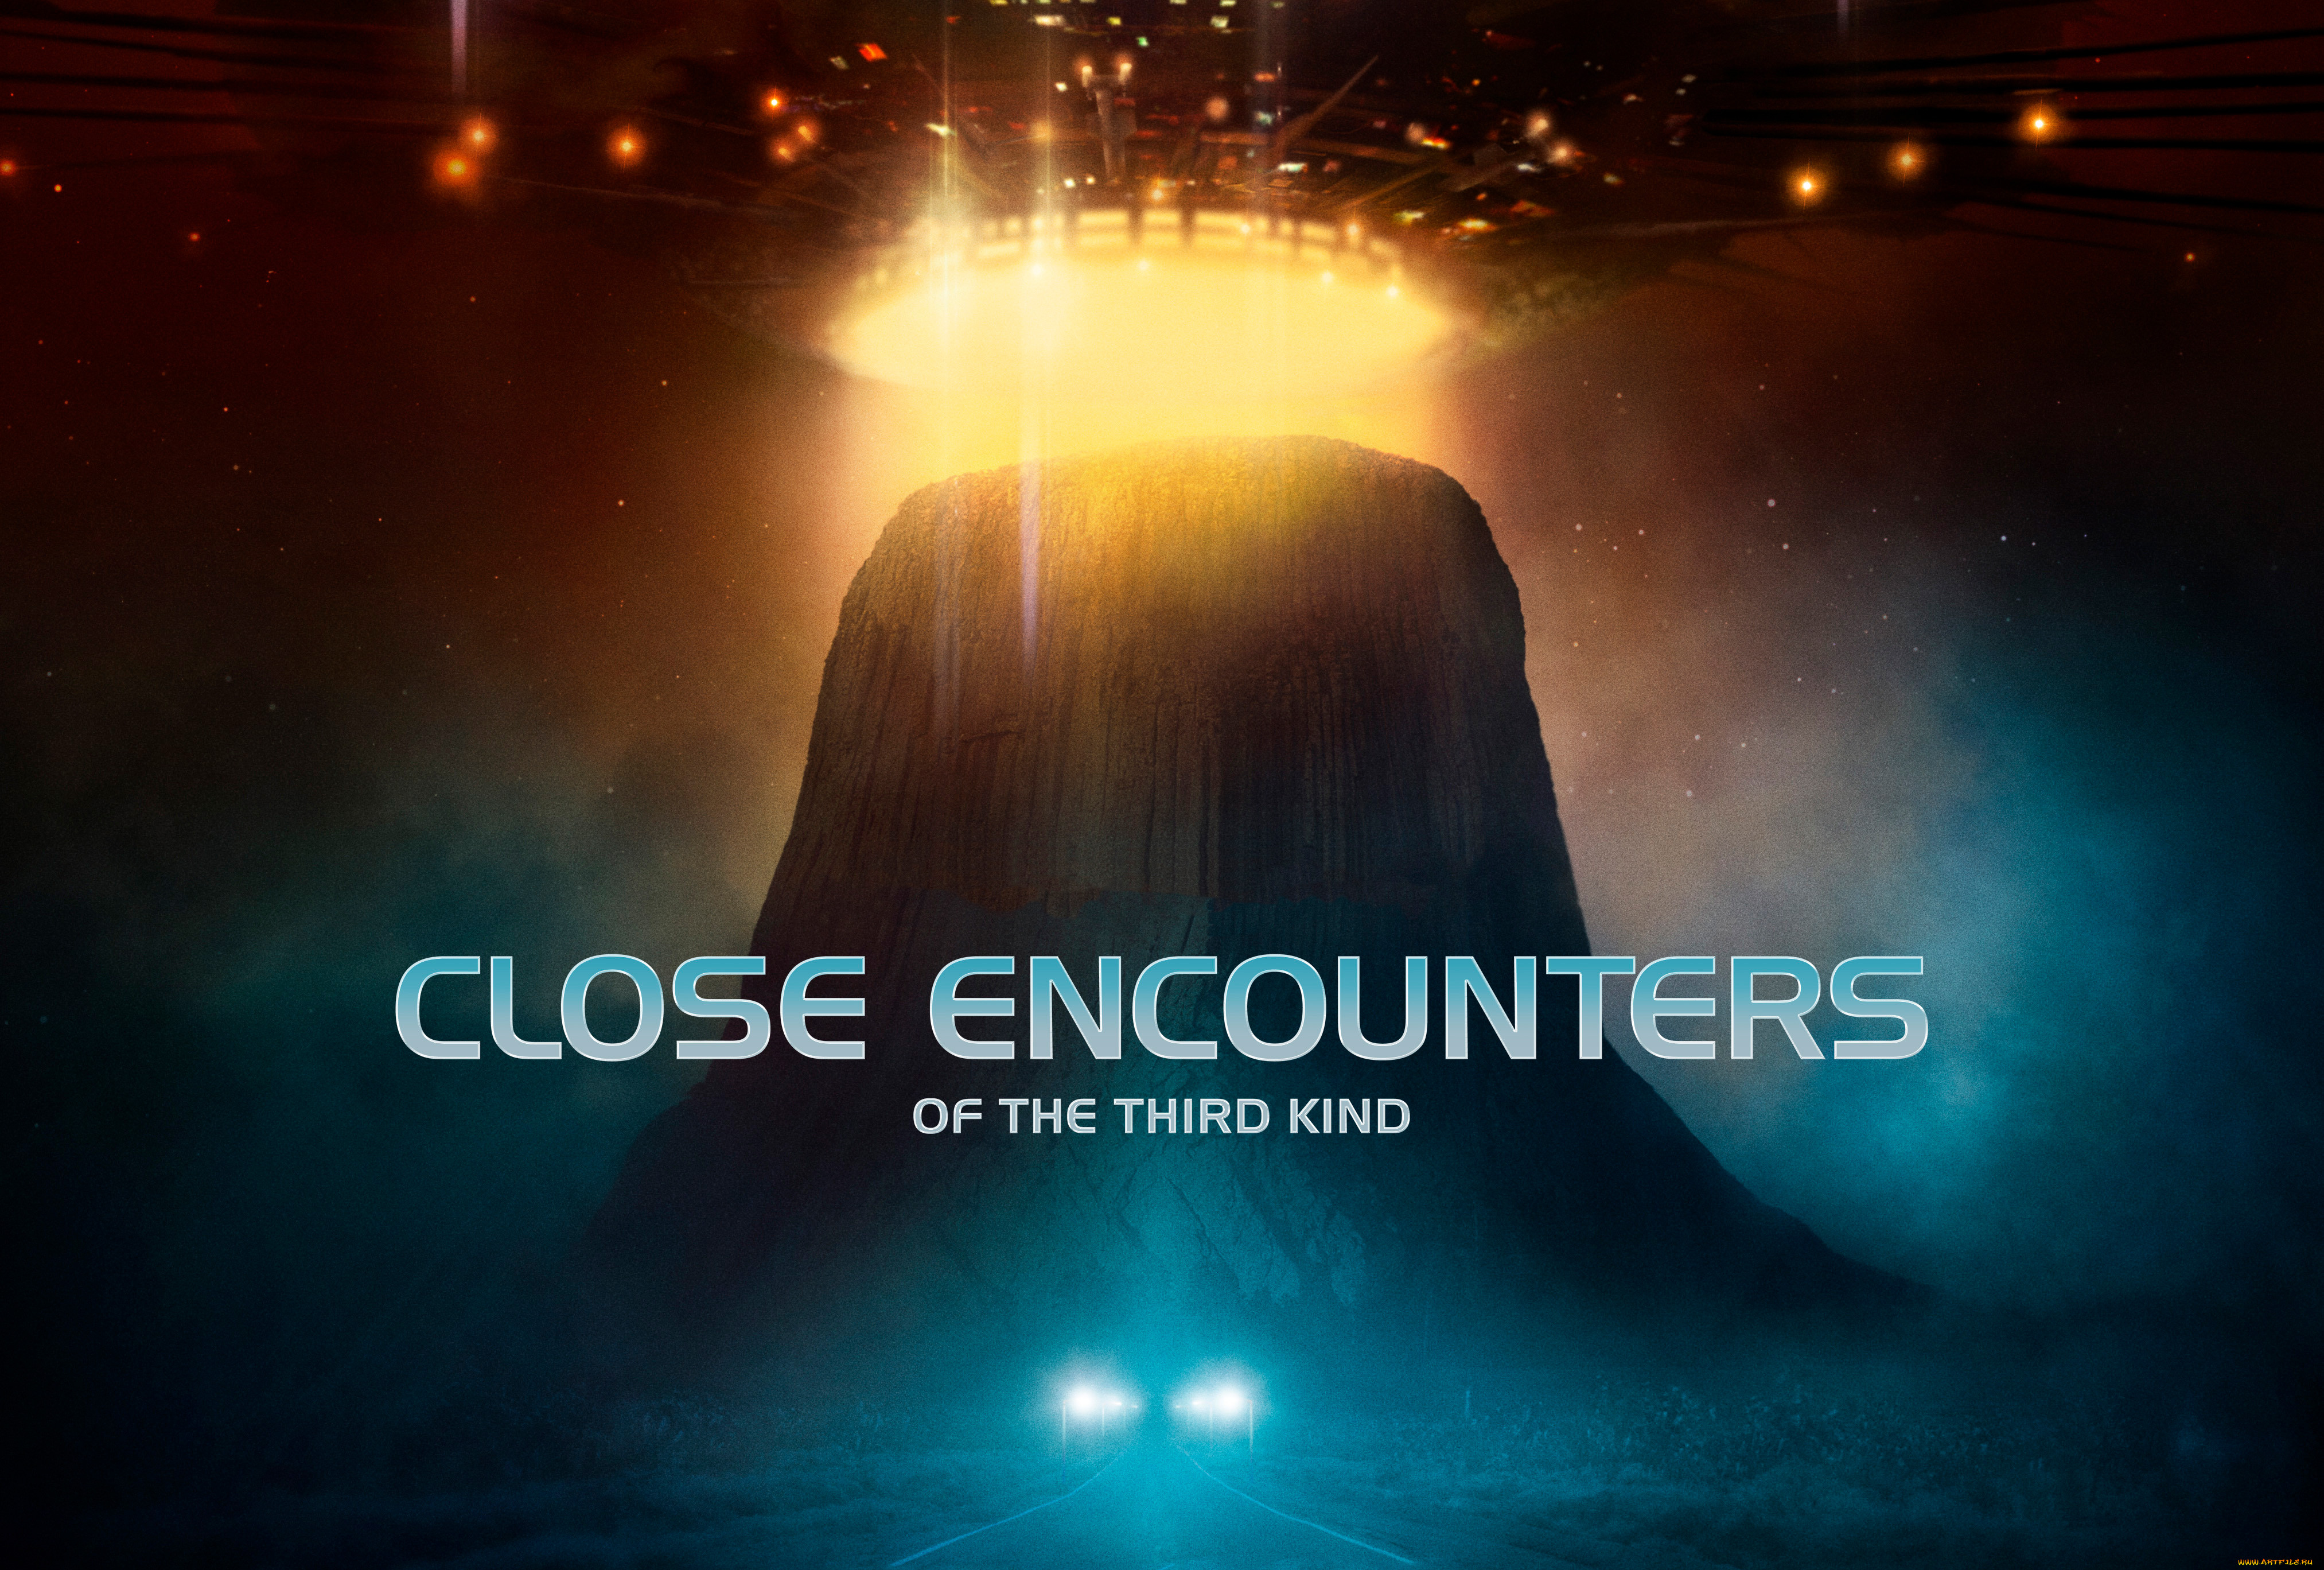  , close encounters of the third kind, close, encounters, of, the, third, kind